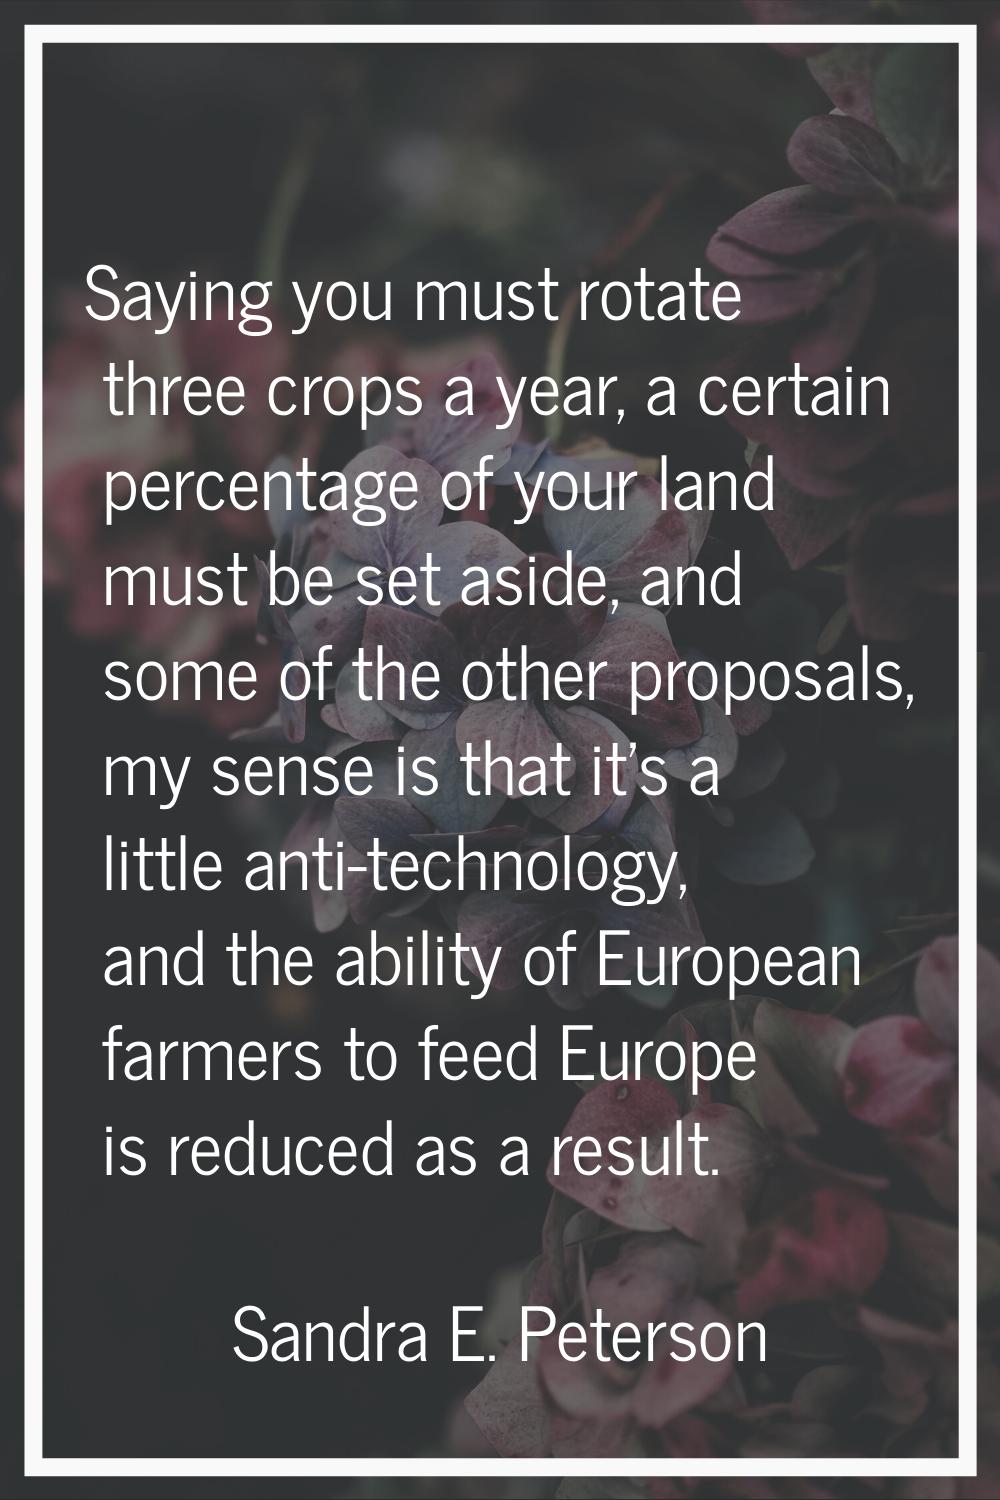 Saying you must rotate three crops a year, a certain percentage of your land must be set aside, and